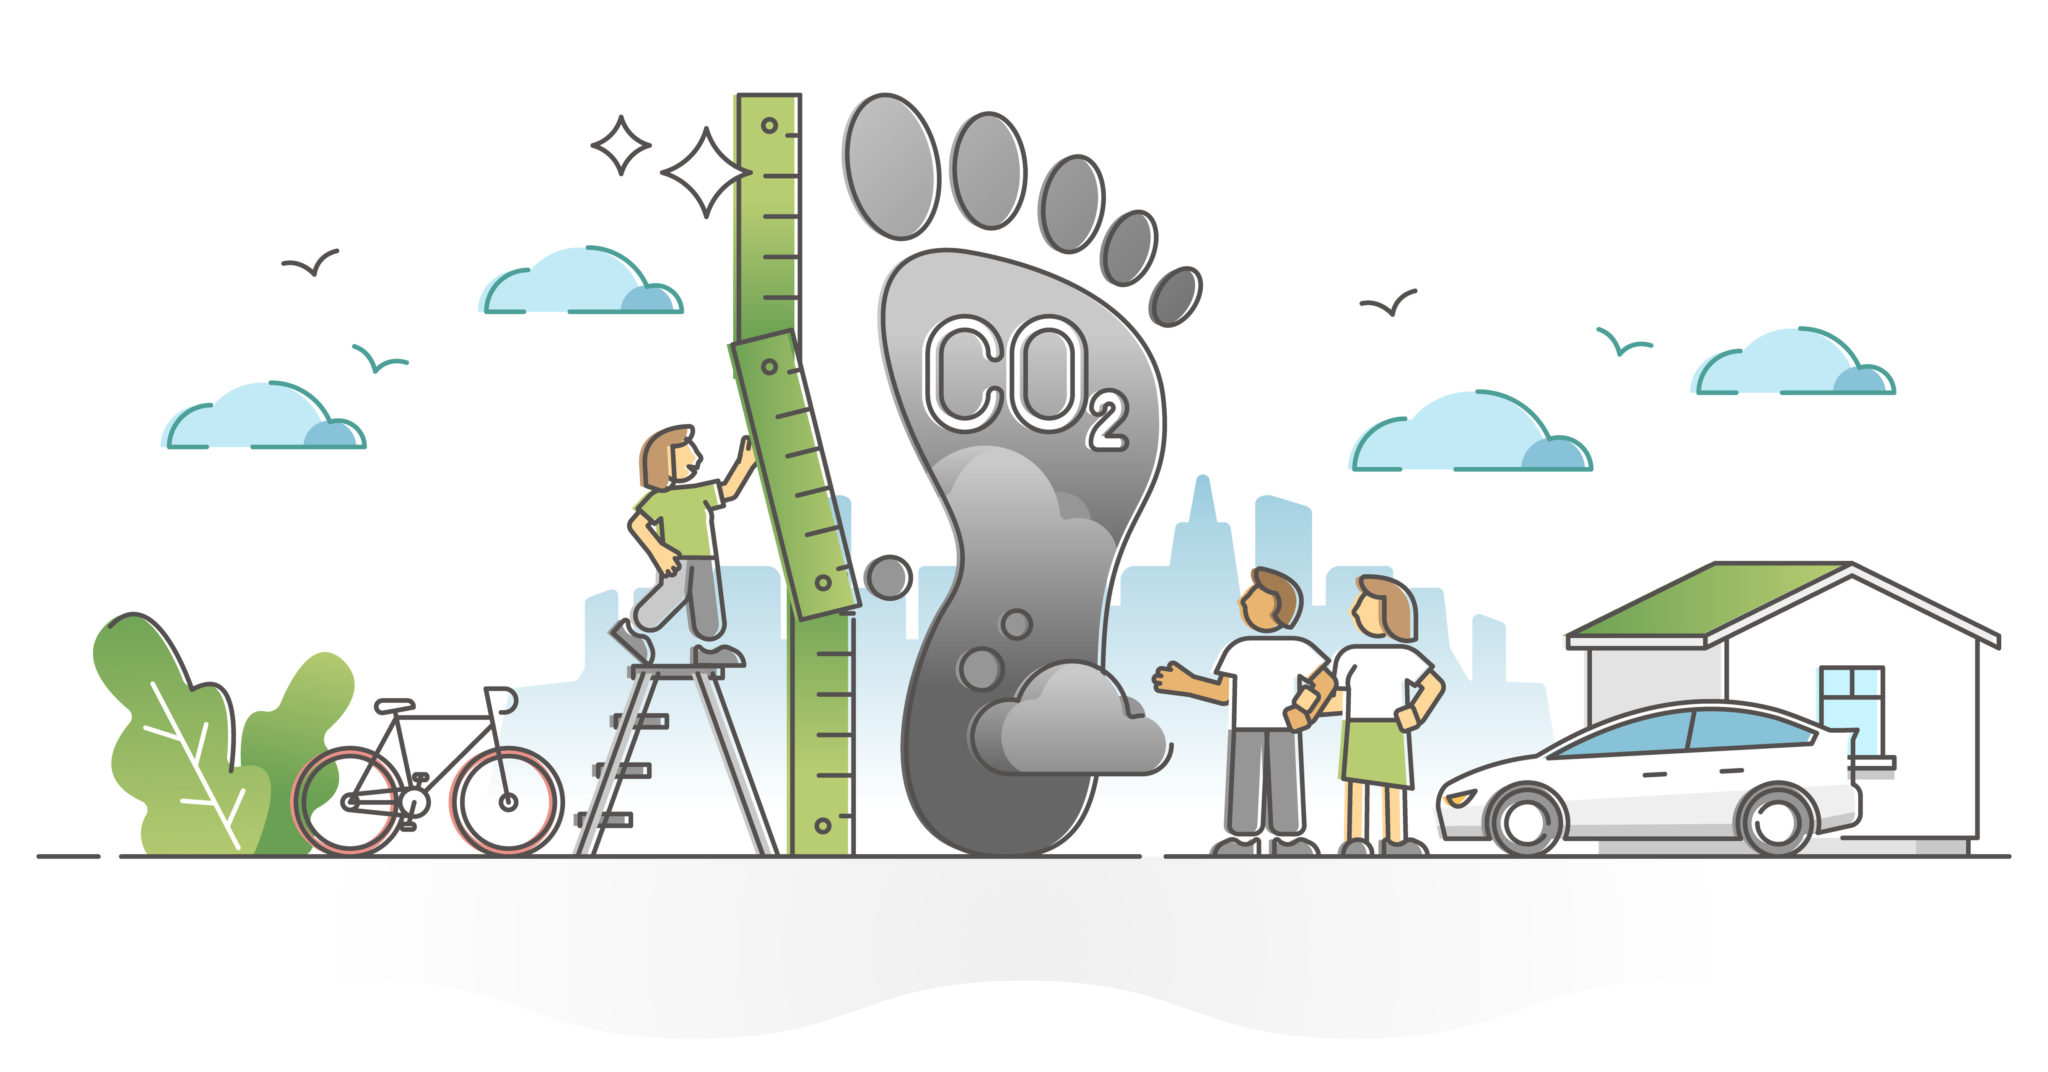 carbon footprint image shows a large footprint and small people